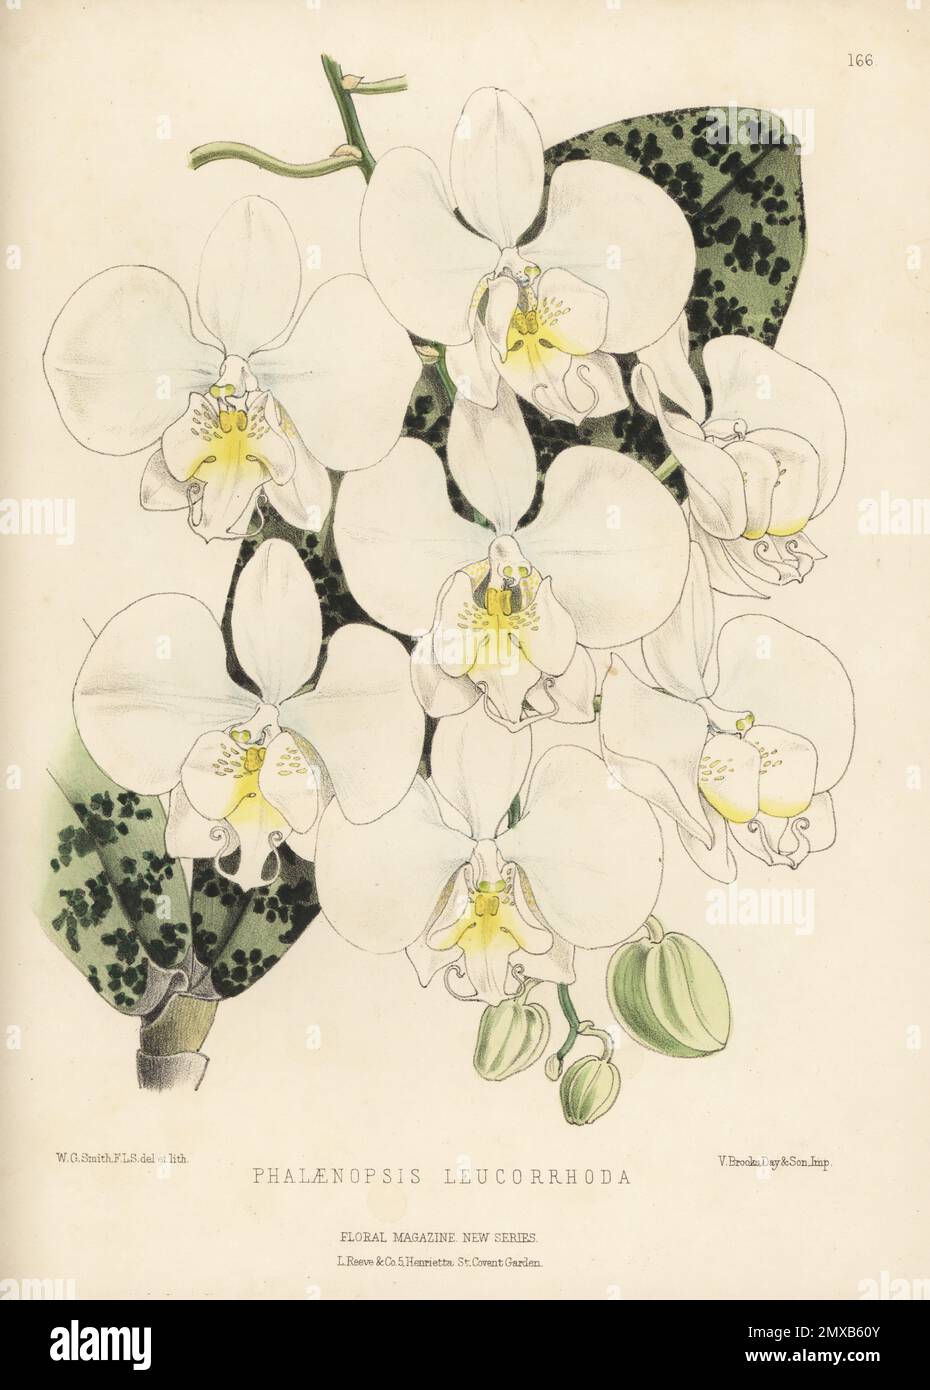 Phalaenopsis × leucorrhoda orchid, natural hybrid of P. aphrodite and P. schilleriana, native to the Philippines. Imported by William Bull of Chelsea. As Phalaenopsis leucorrhoda. Handcolored botanical illustration drawn and lithographed by Worthington George Smith from Henry Honywood Dombrain's Floral Magazine, New Series, Volume 3, L. Reeve, London, 1874. Lithograph printed by Vincent Brooks, Day & Son. Stock Photo